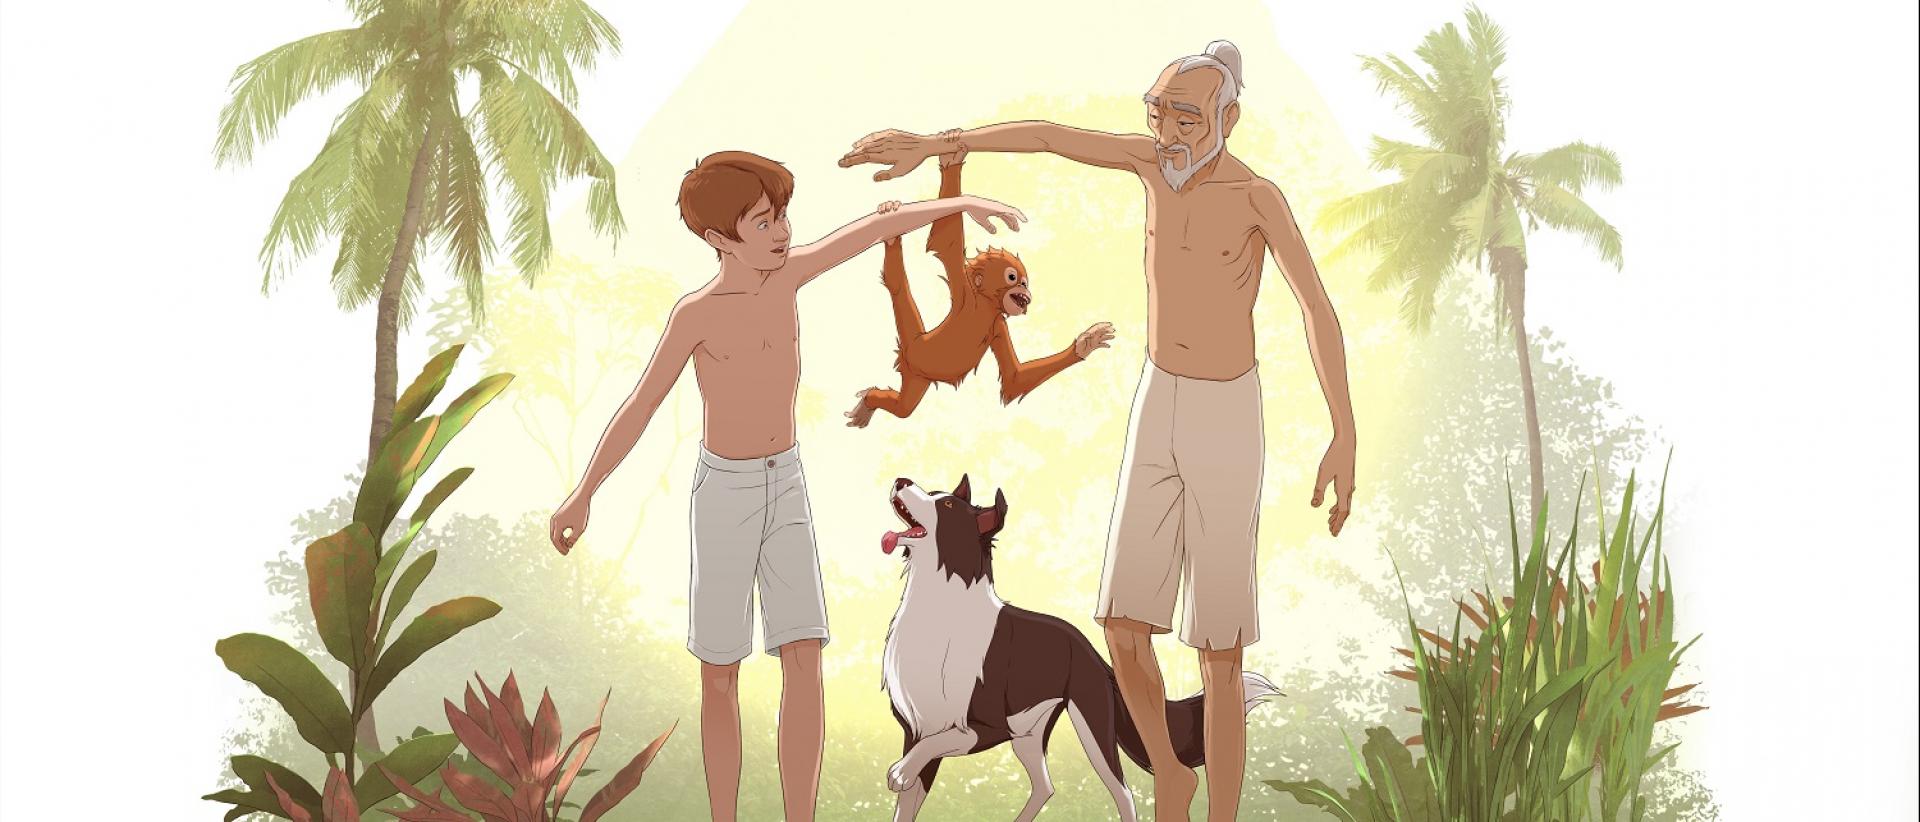 still from animated film kensuke's kingdom featuring a boy and an old man walking through a jungle carrying a monkey between them, with a doc walking beside.